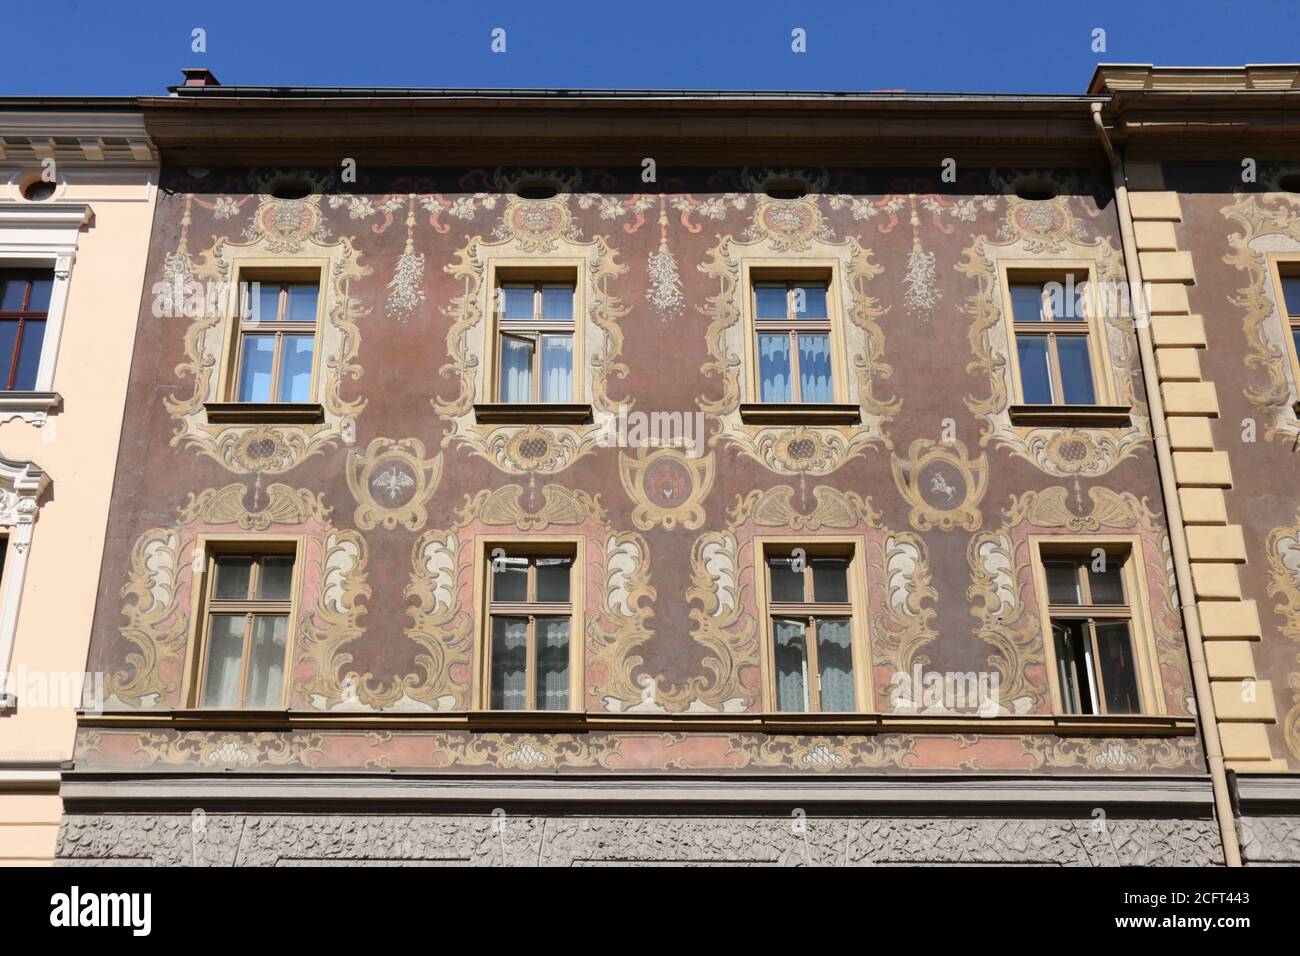 Cracow. Krakow. Poland. Secessionist style sgraffito decoration on the facade of tenement house building in the Old Town. Stock Photo